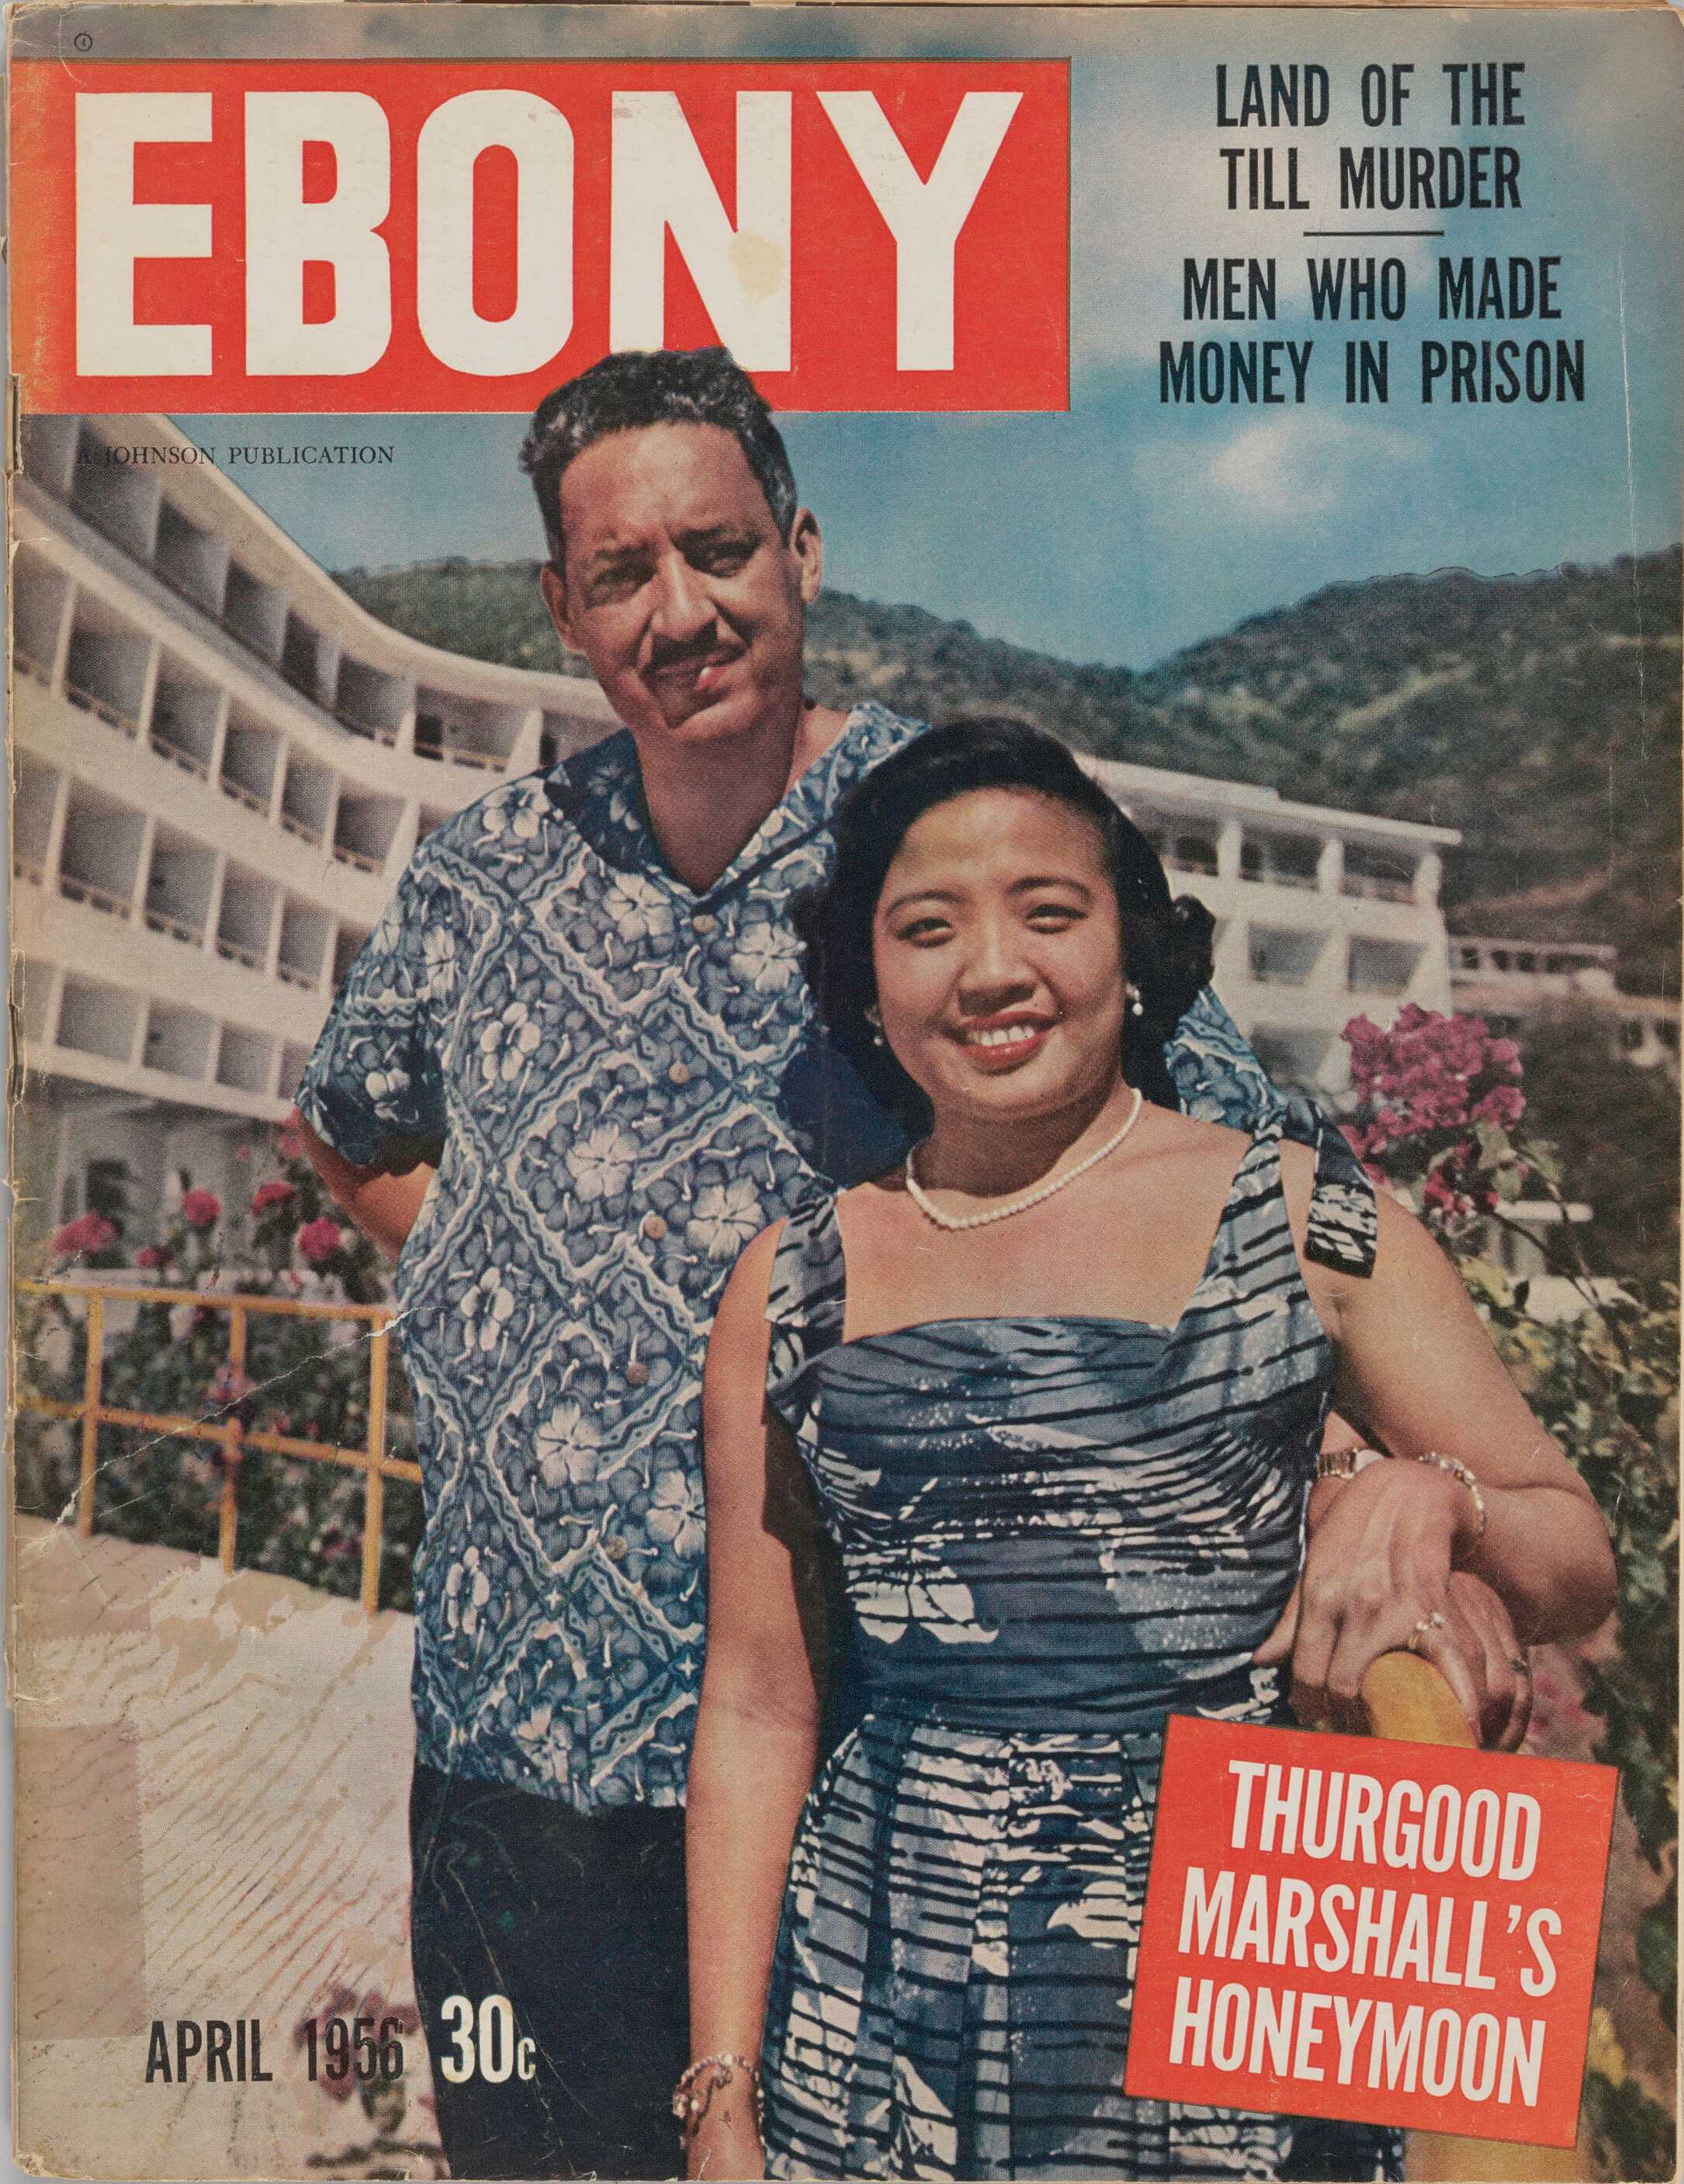 The April 1956 issue of Ebony magazine. The cover features a full-sized color photograph of Thurgood Marshall and Cecelie Suyat on their honeymoon in the Virgin Islands.